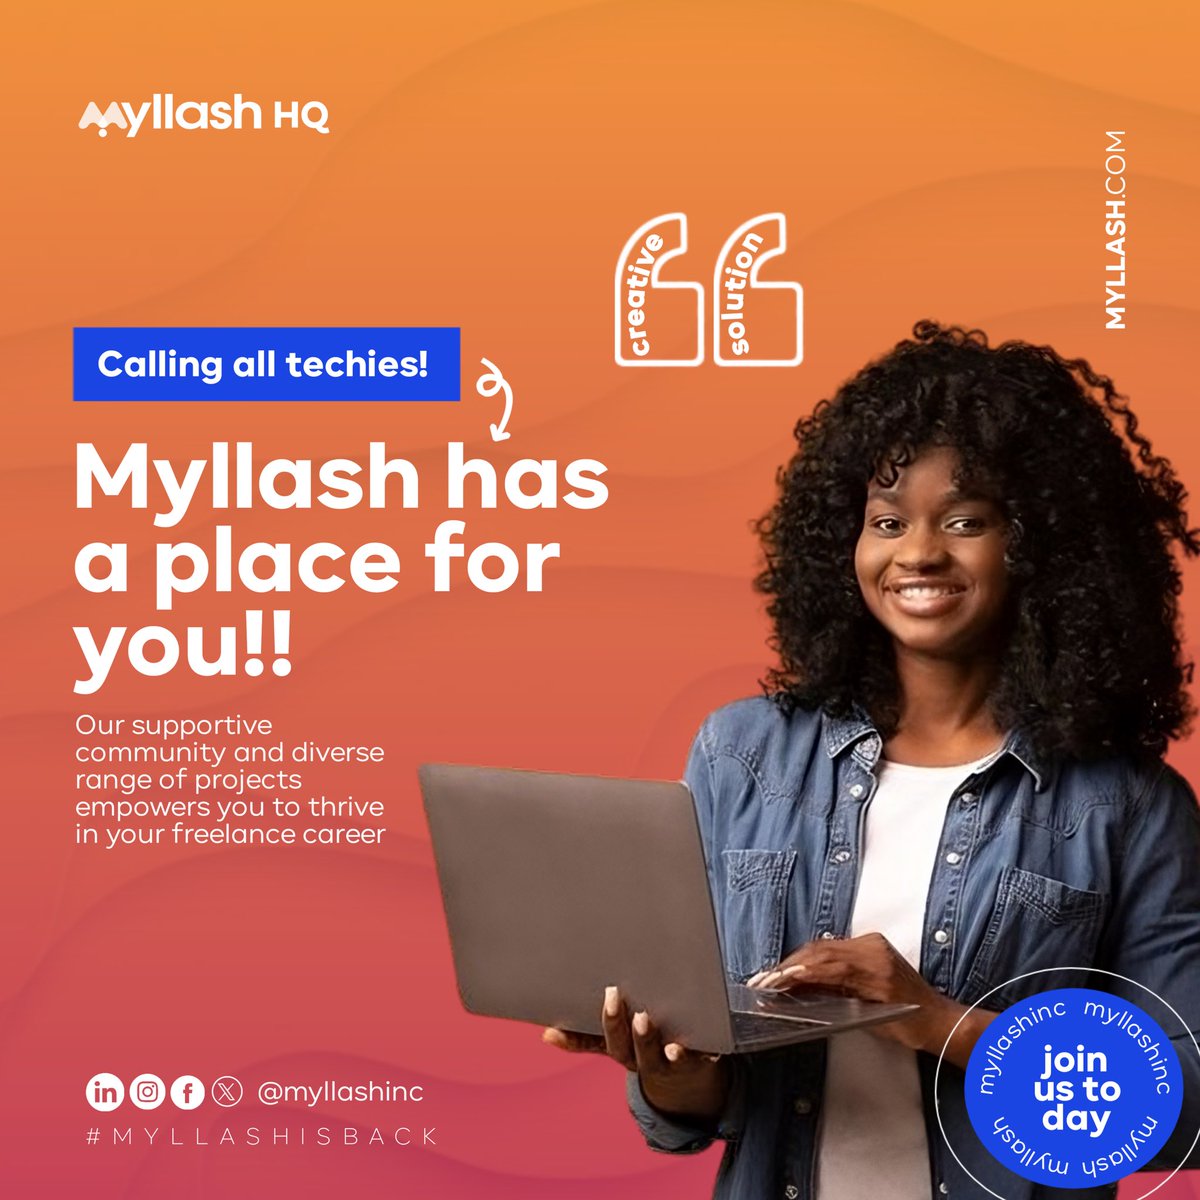 Let your creativity shine with Myllash HQ! Join our community of talented designers and turn your ideas into captivating visuals that leave a lasting impression 
.
#myllashhq #myllash #techcompany #softwaresolutions #creativemind #innovation #freelance